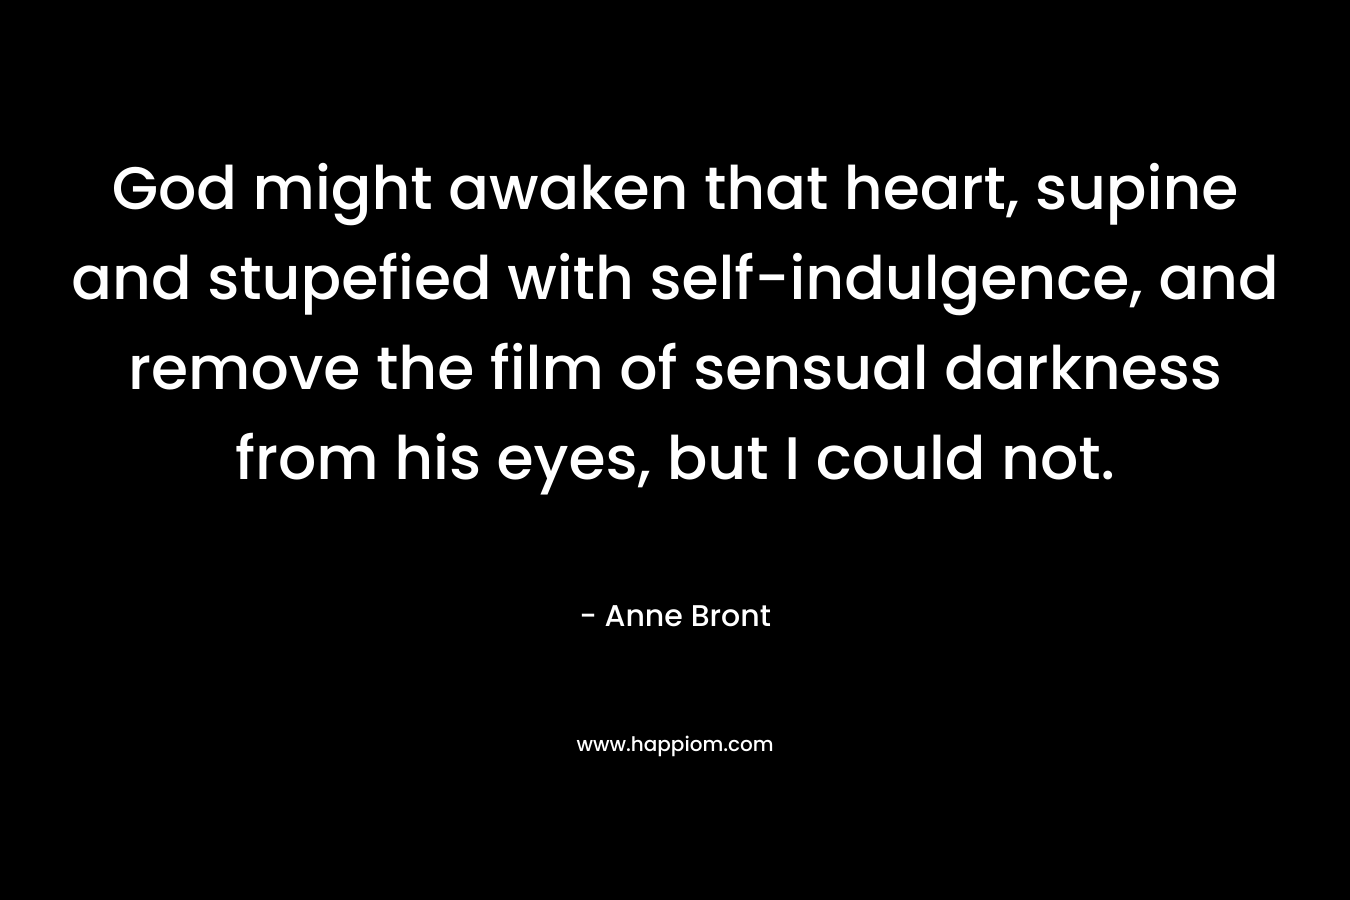 God might awaken that heart, supine and stupefied with self-indulgence, and remove the film of sensual darkness from his eyes, but I could not. – Anne Bront